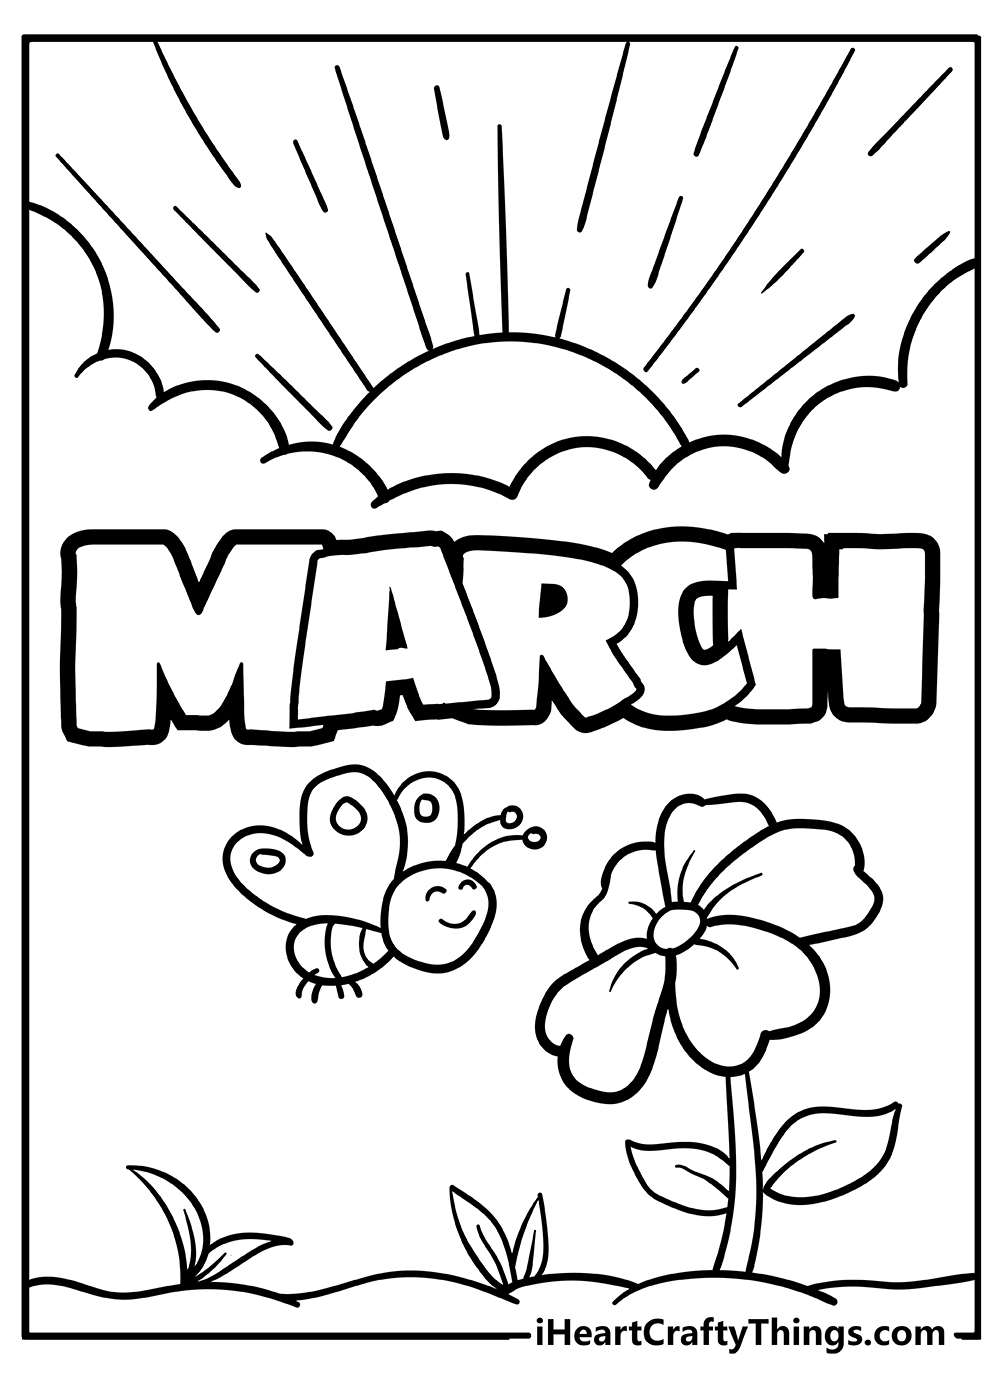 March Coloring Original Sheet for children free download